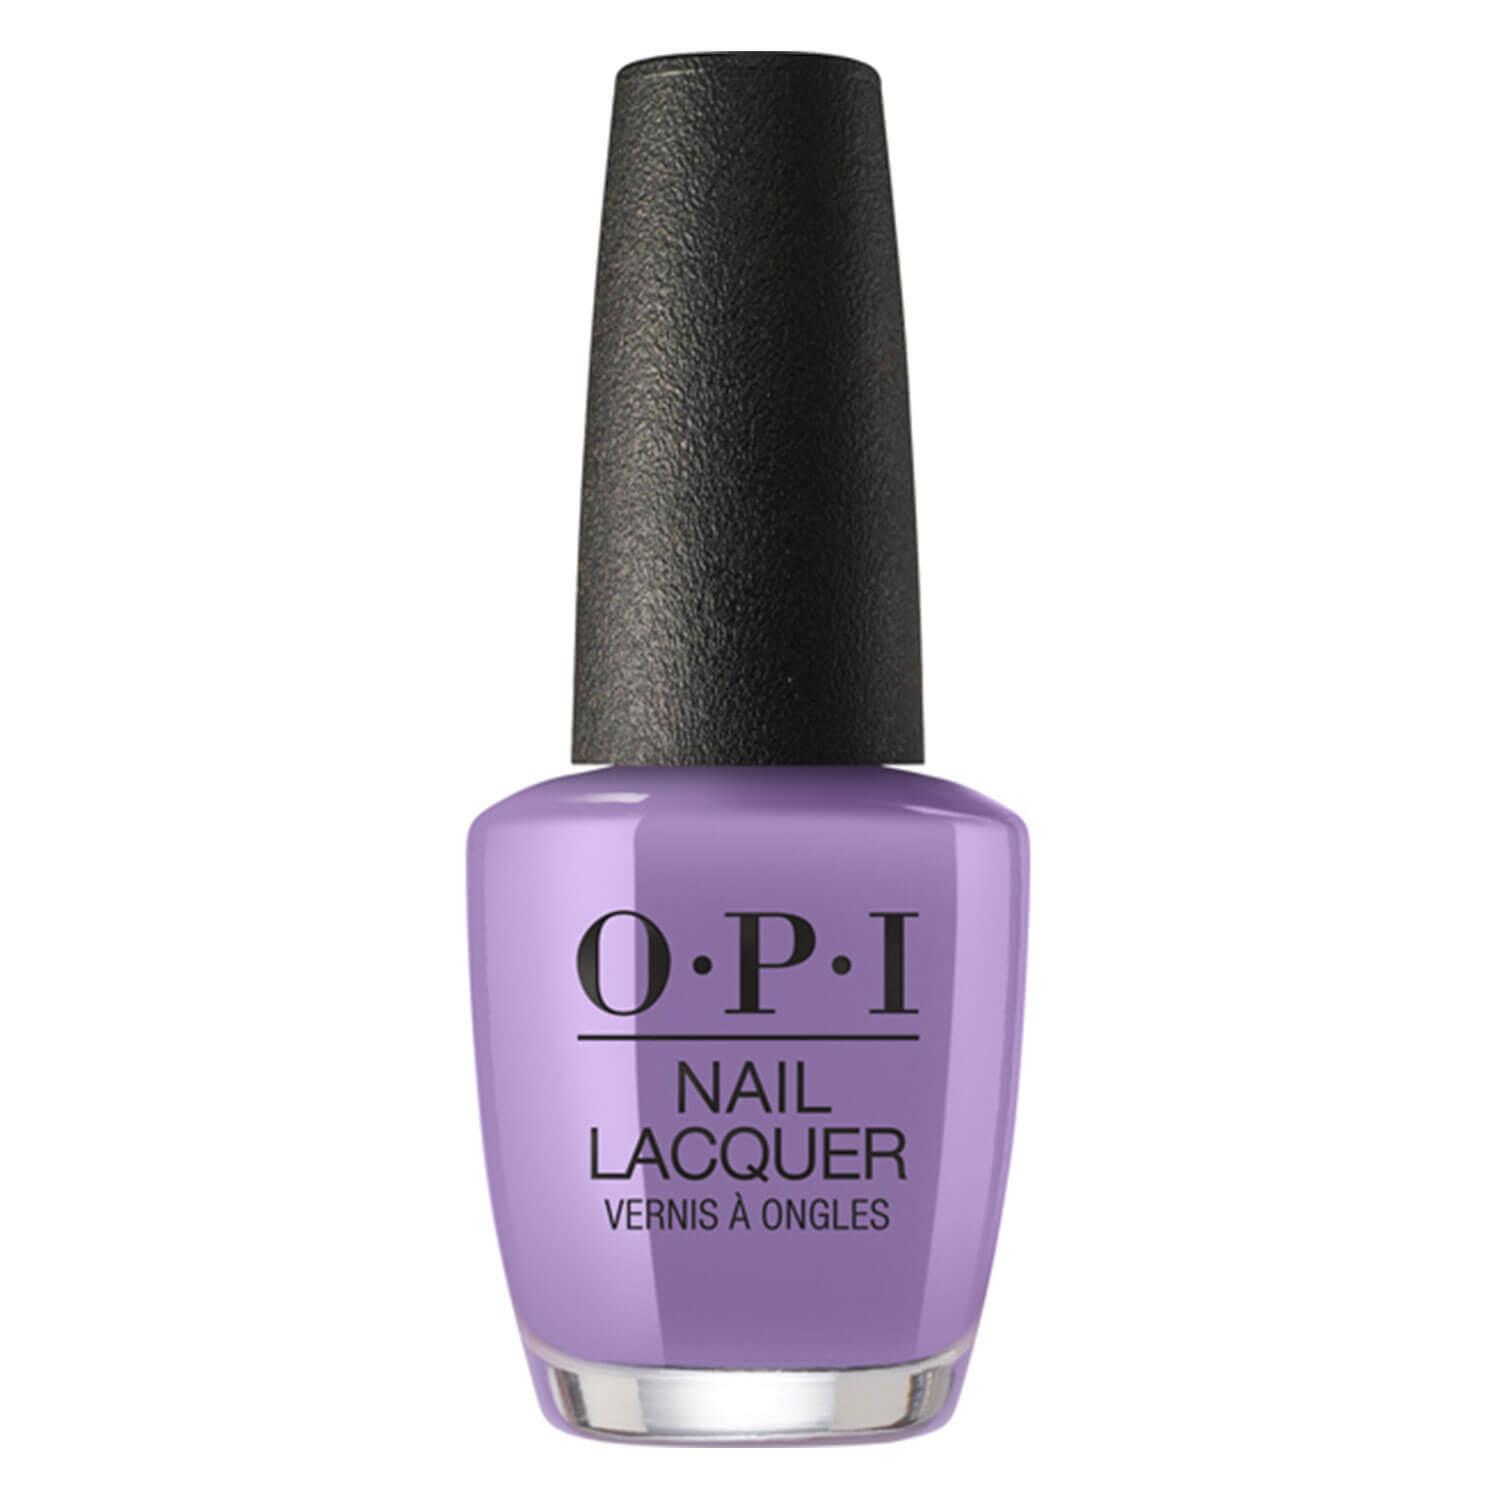 Brights - Do you lilac it?